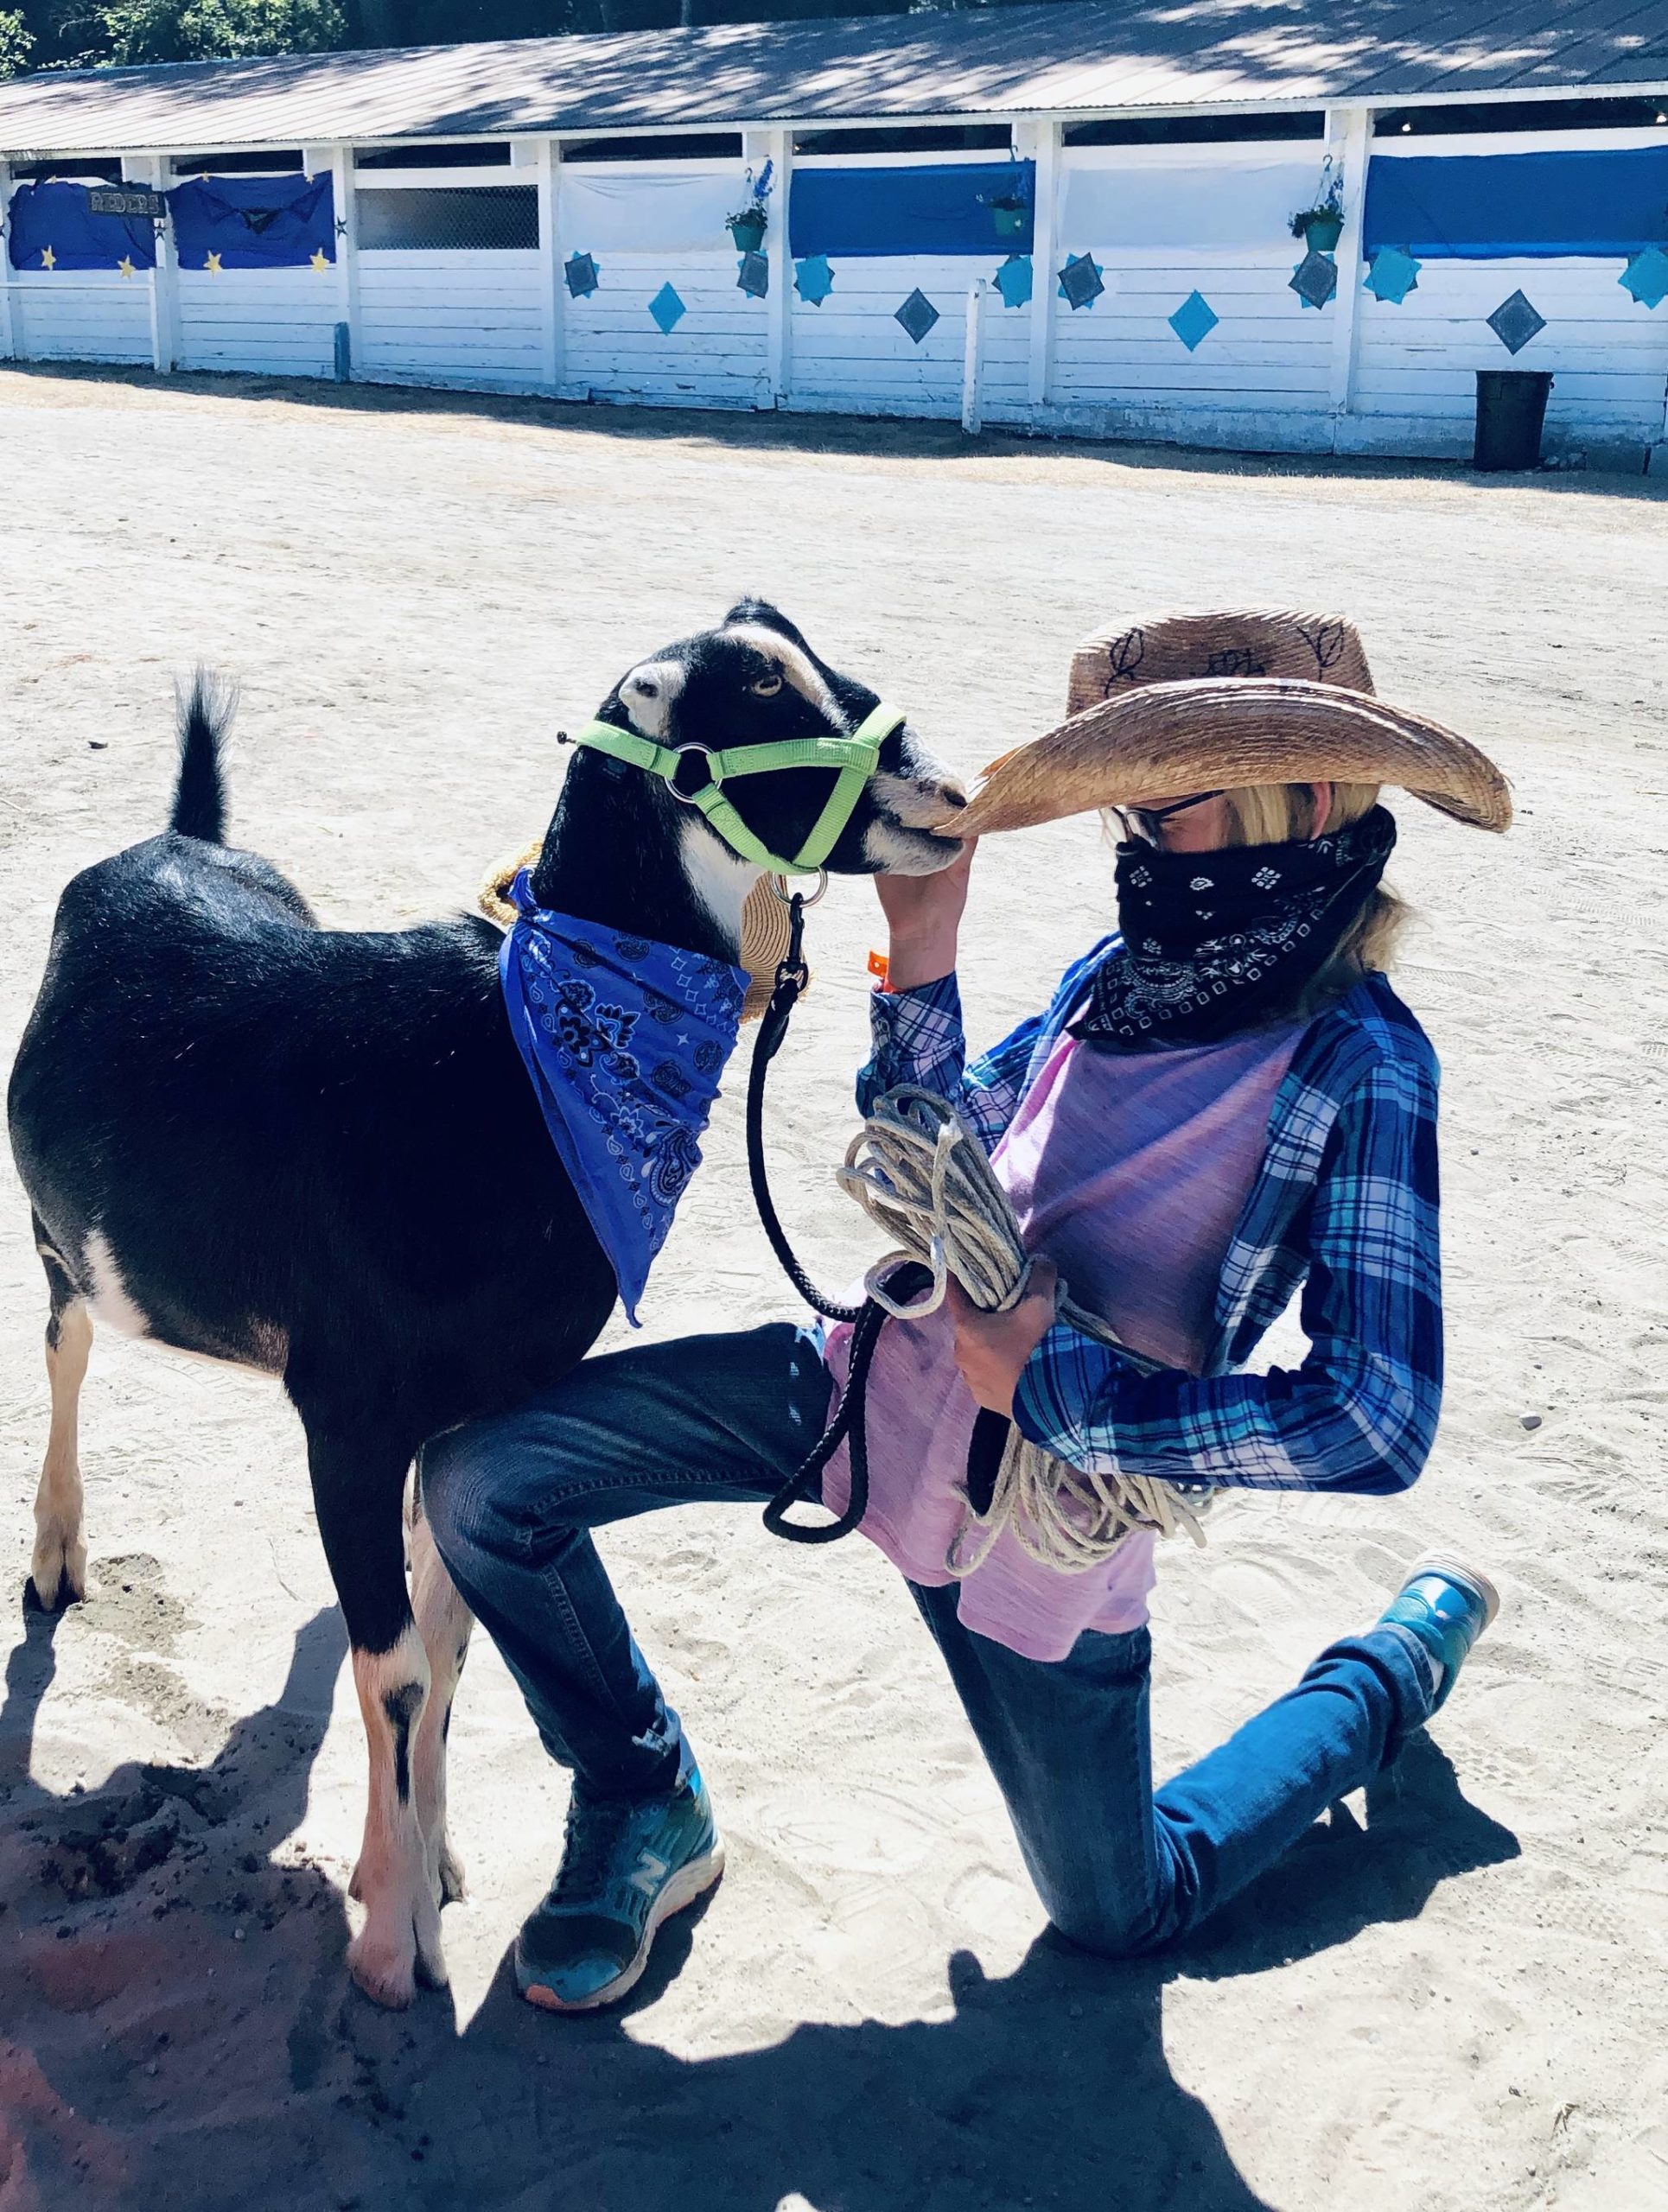 Kenny, pictured here with Peyton Bodenhafer, 11. The pair dressed up as cowboys for a contest at a previous Whidbey Island Fair. (Photo provided)